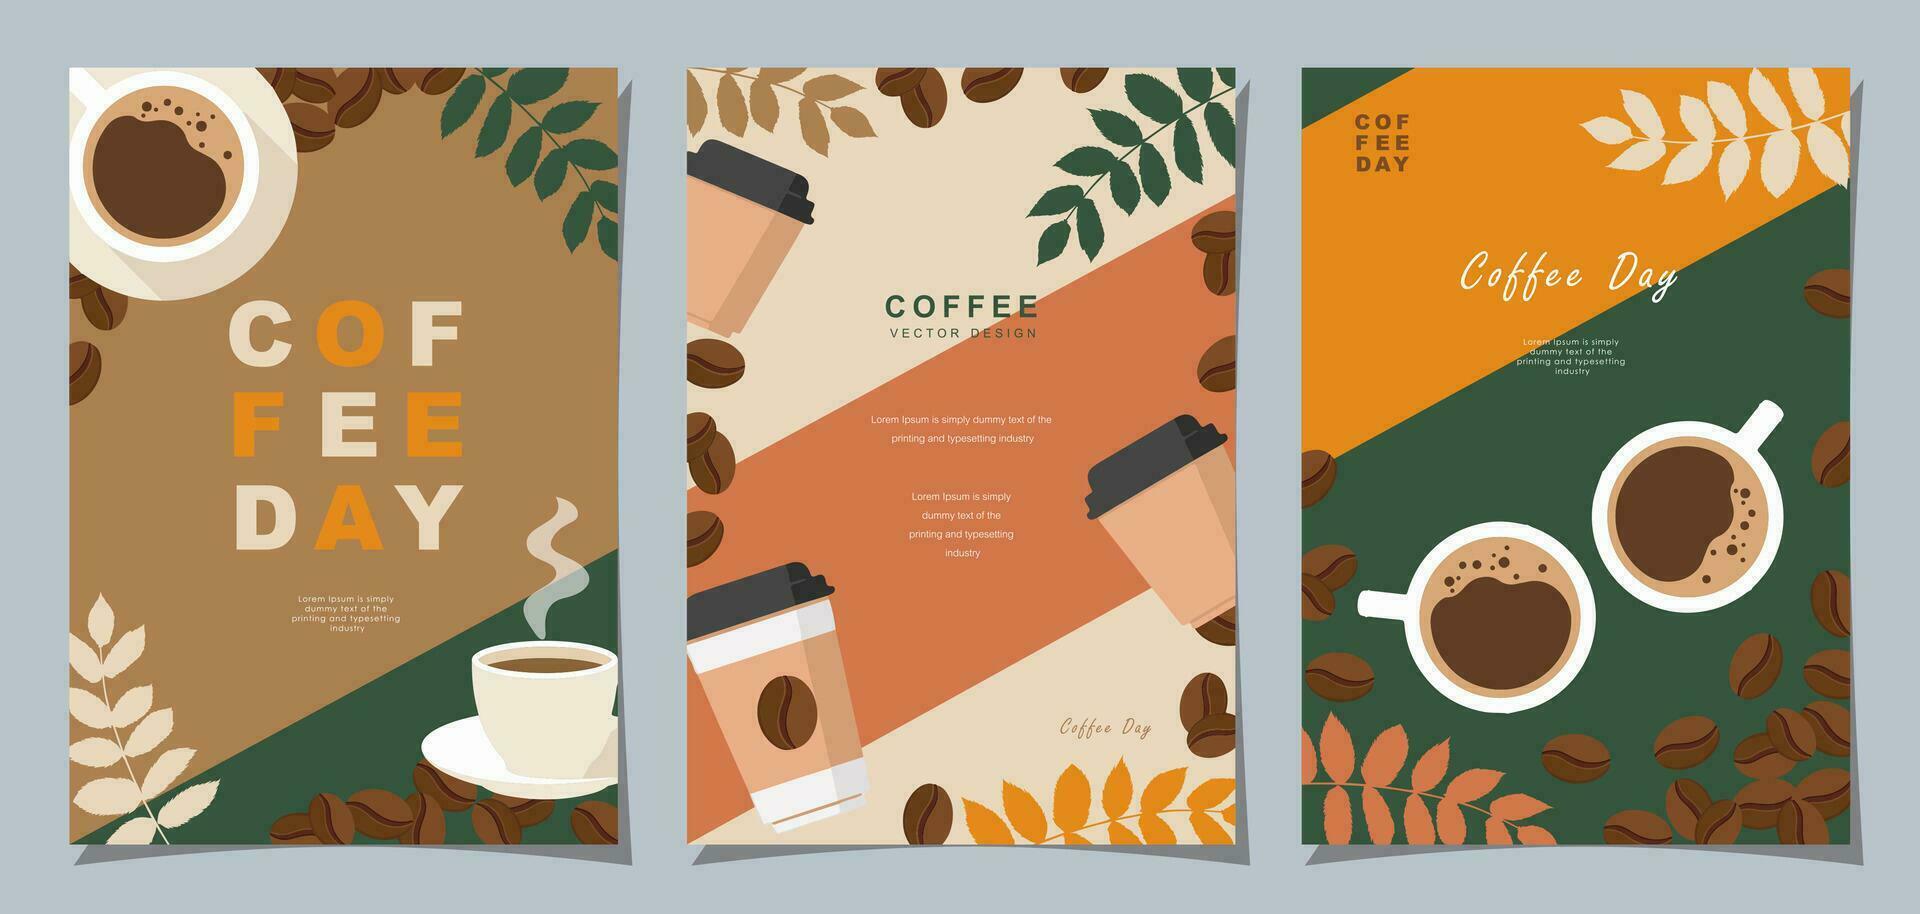 Set of Sketch banners with coffee beans and leaves on colorful background for poster or another template design. vector illustration.